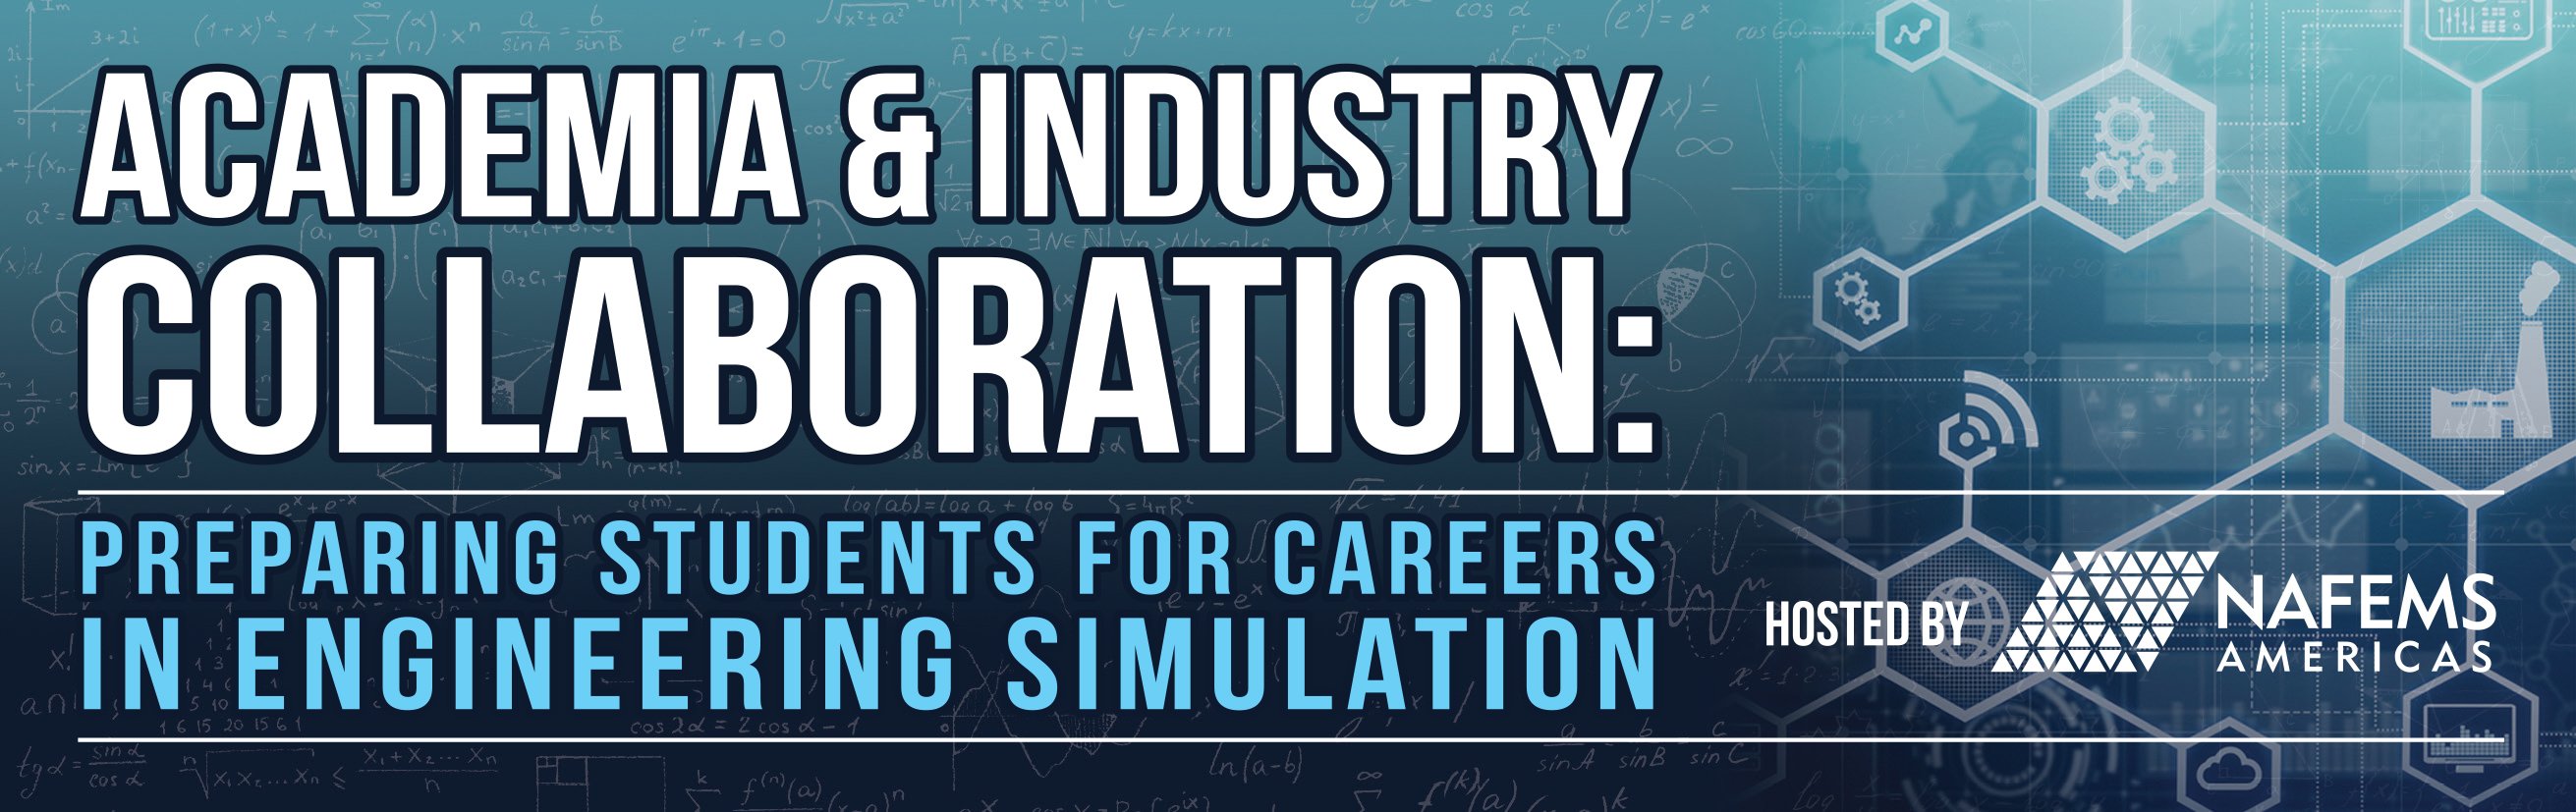 Academia & Industry Collaboration: Preparing Students for Careers in Engineering Simulation